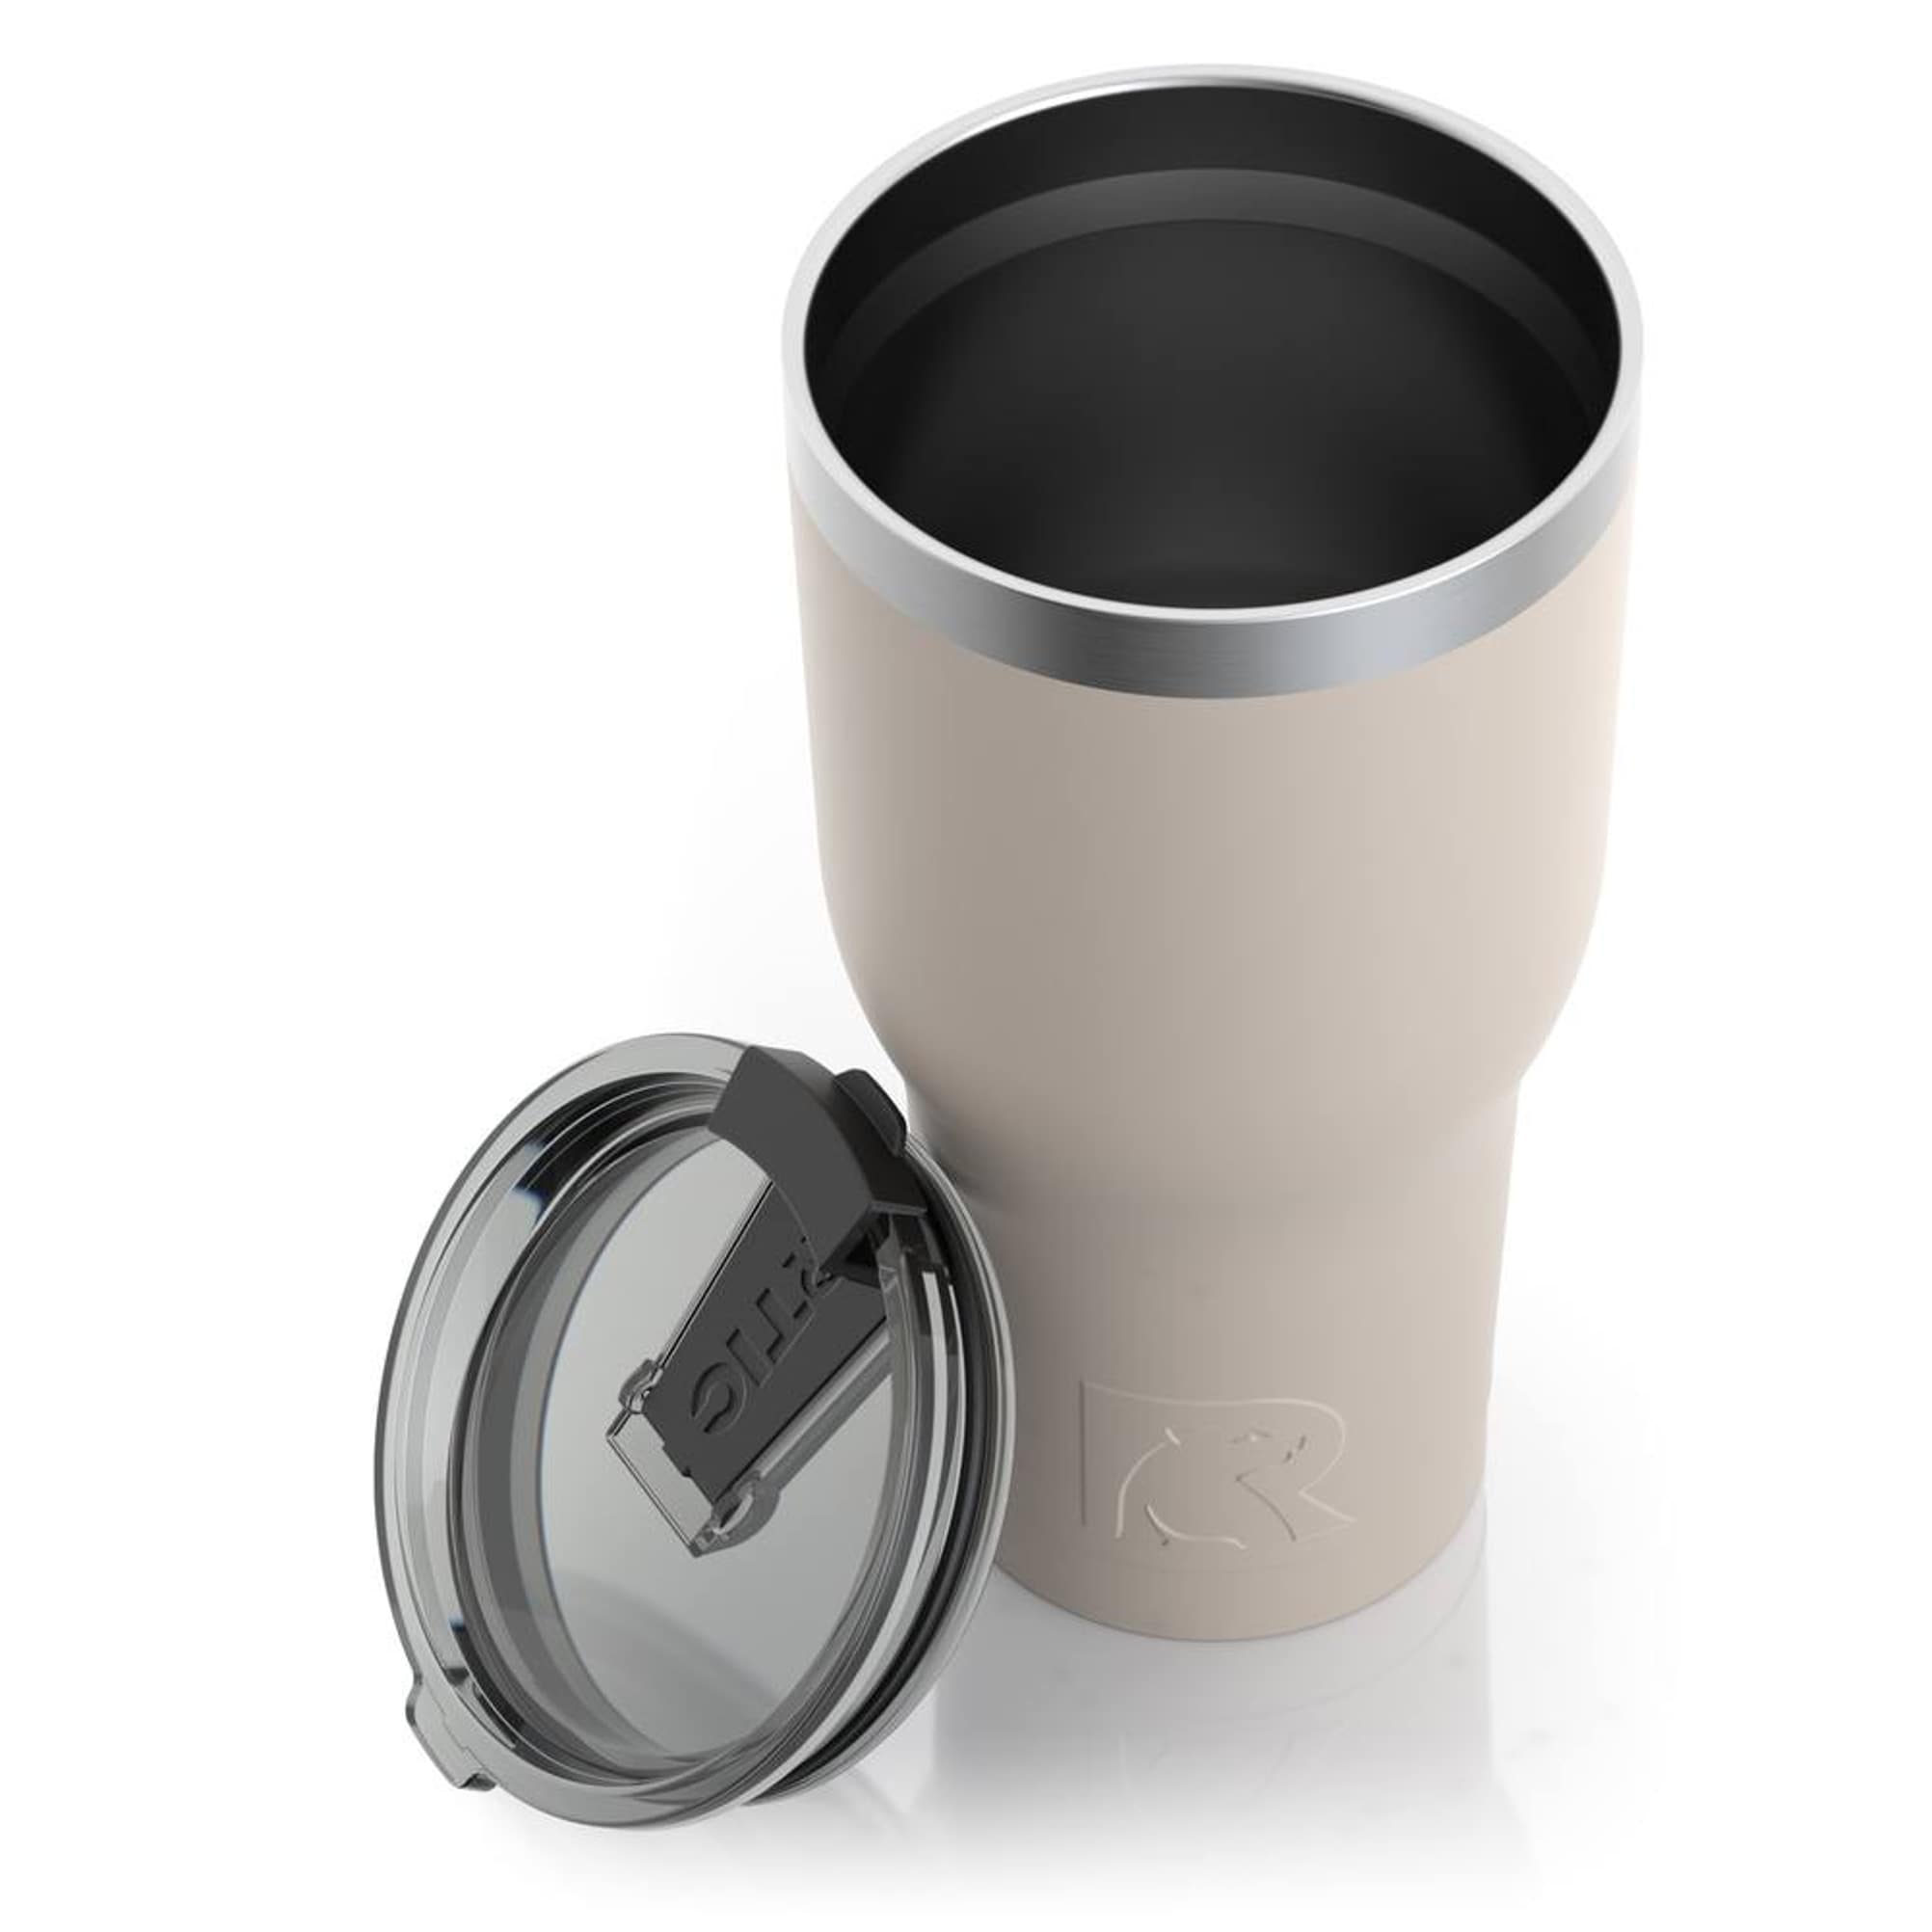 RTIC 20 oz Coffee Travel Mug with Lid and Handle, Stainless  Steel Vacuum-Insulated Mugs, Leak, Spill Proof, Hot Beverage and Cold,  Portable Thermal Tumbler Cup for Car, Camping, White: Tumblers